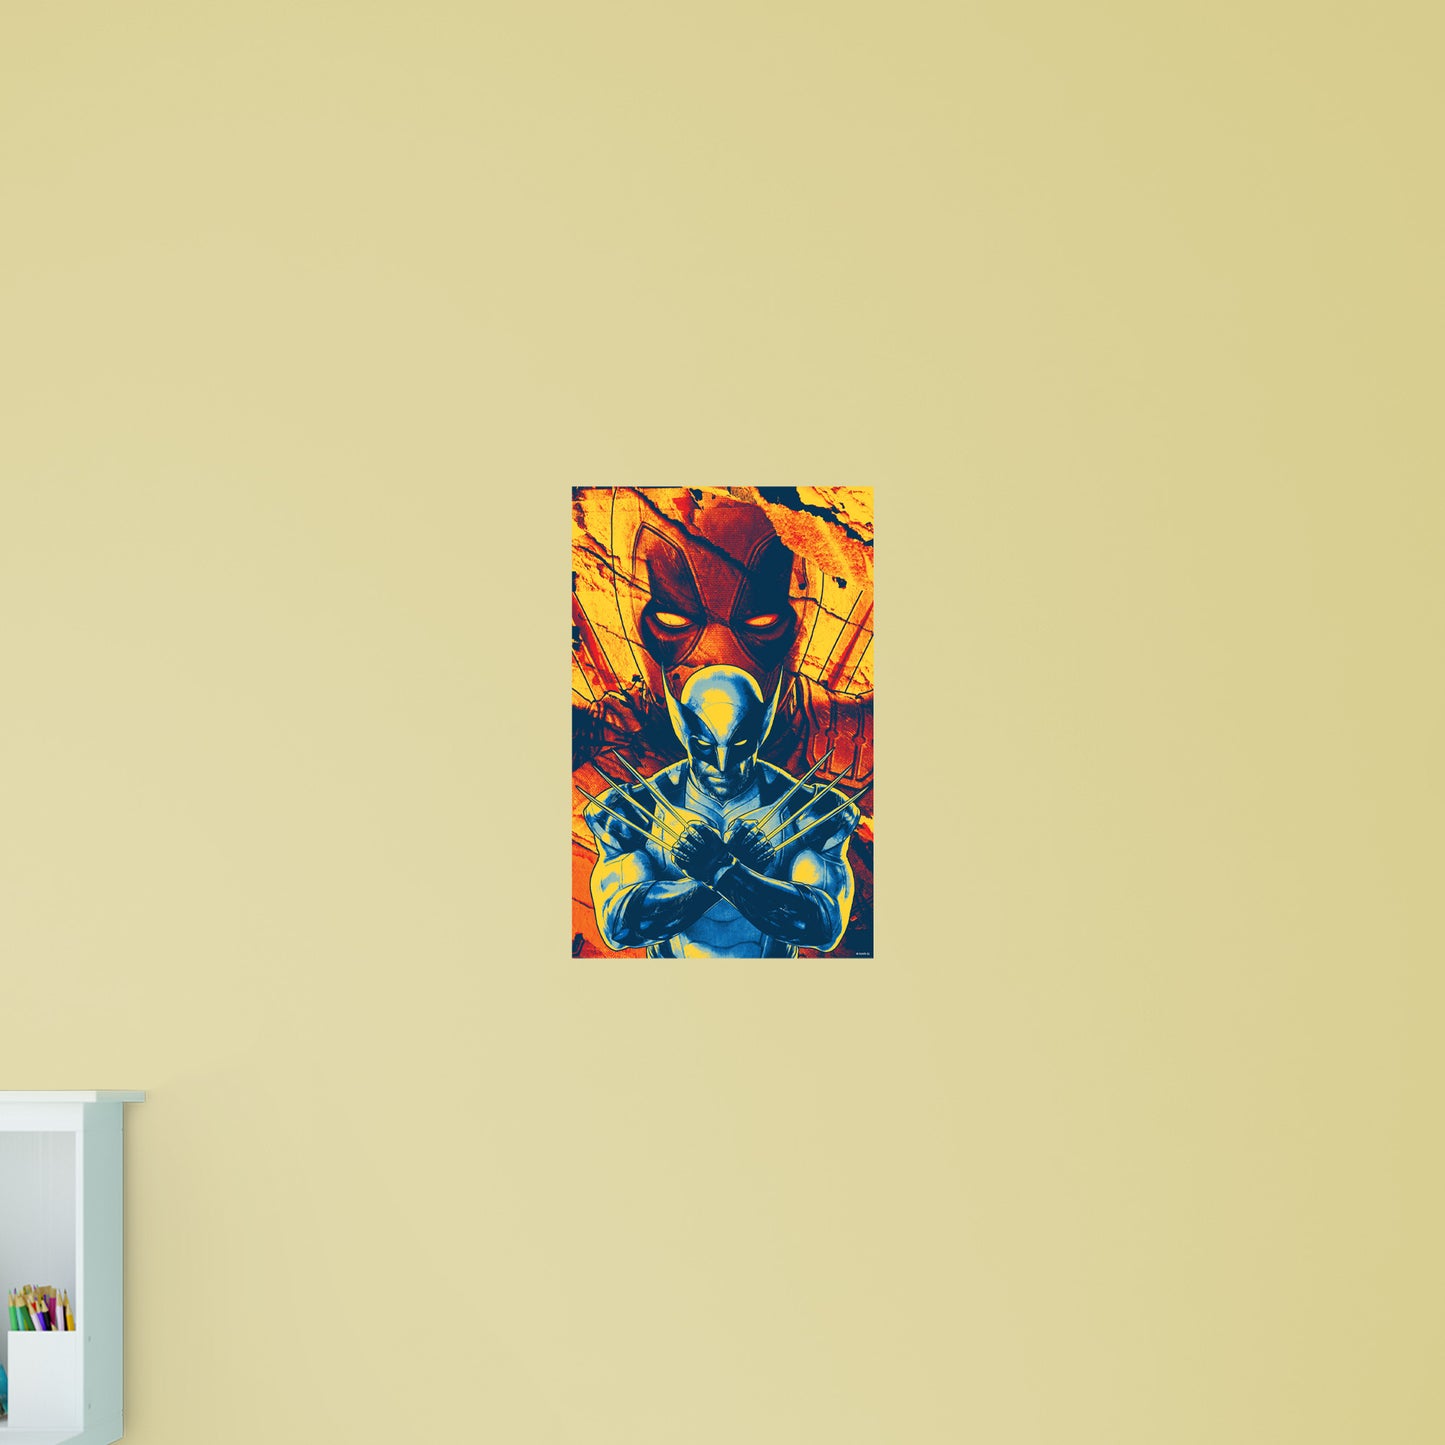 Deadpool & Wolverine: Deadpool & Wolverine Torn Poster        - Officially Licensed Marvel Removable     Adhesive Decal